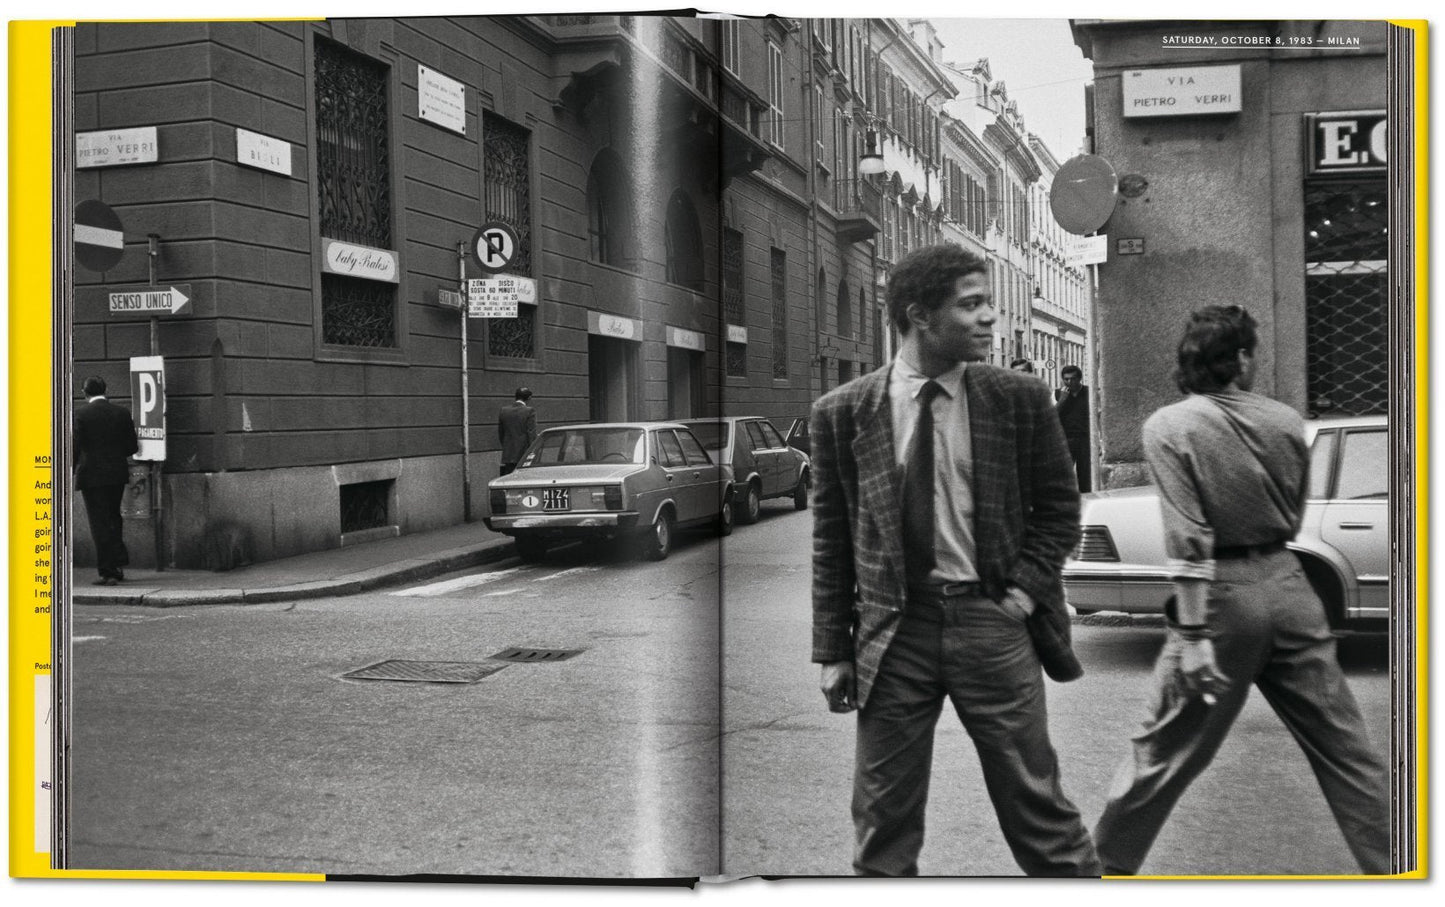 Warhol on Basquiat. Andy Warhol’s Words and Pictures DEIMOTIV